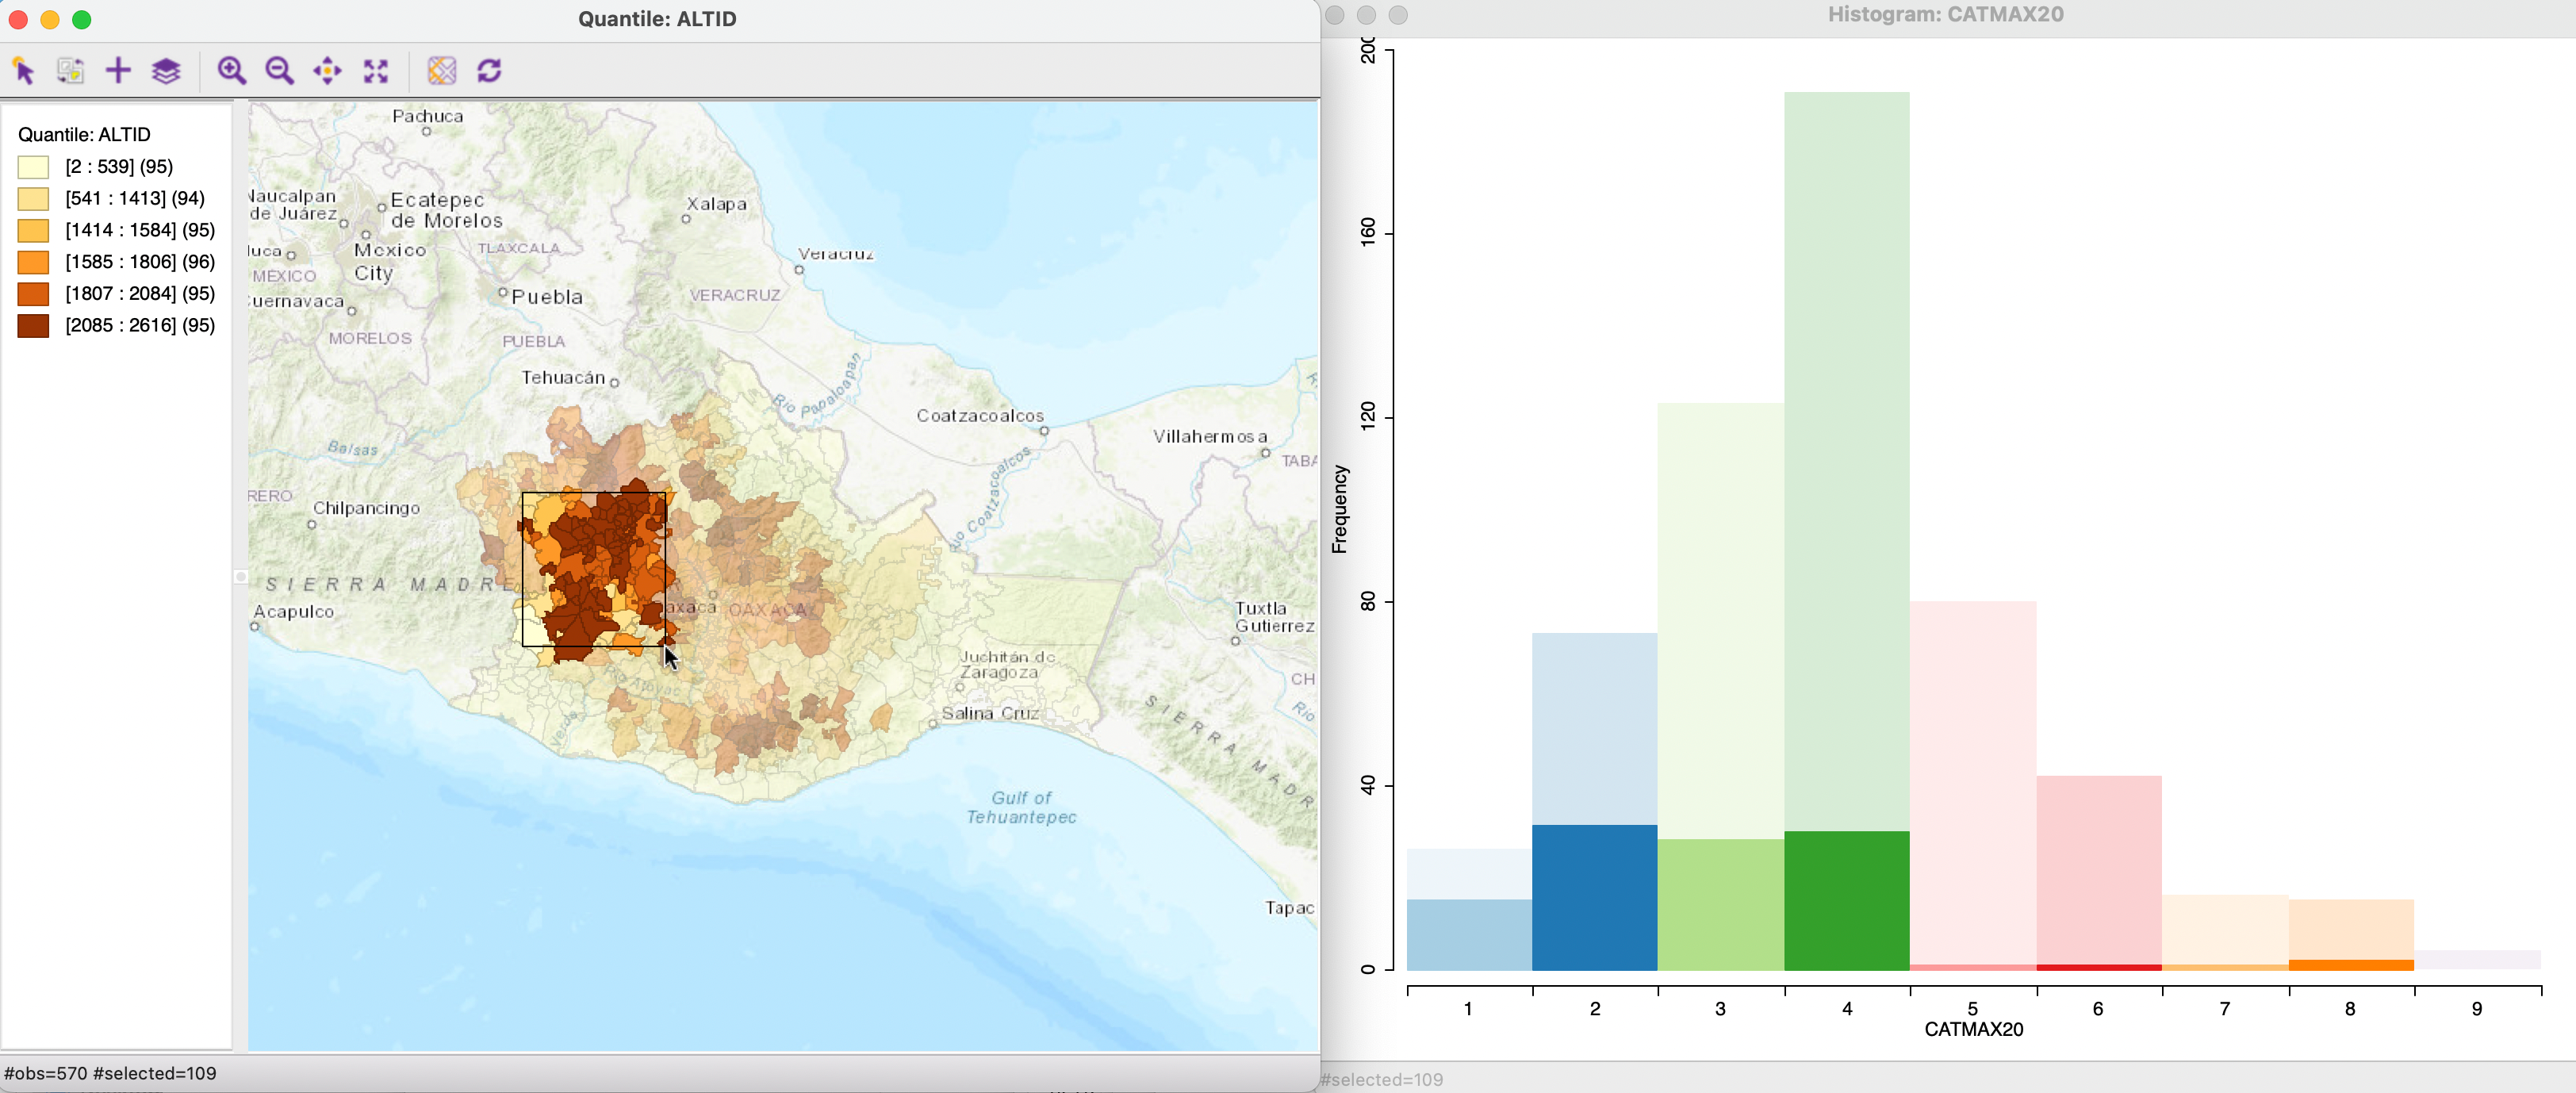 Linking between map and histogram